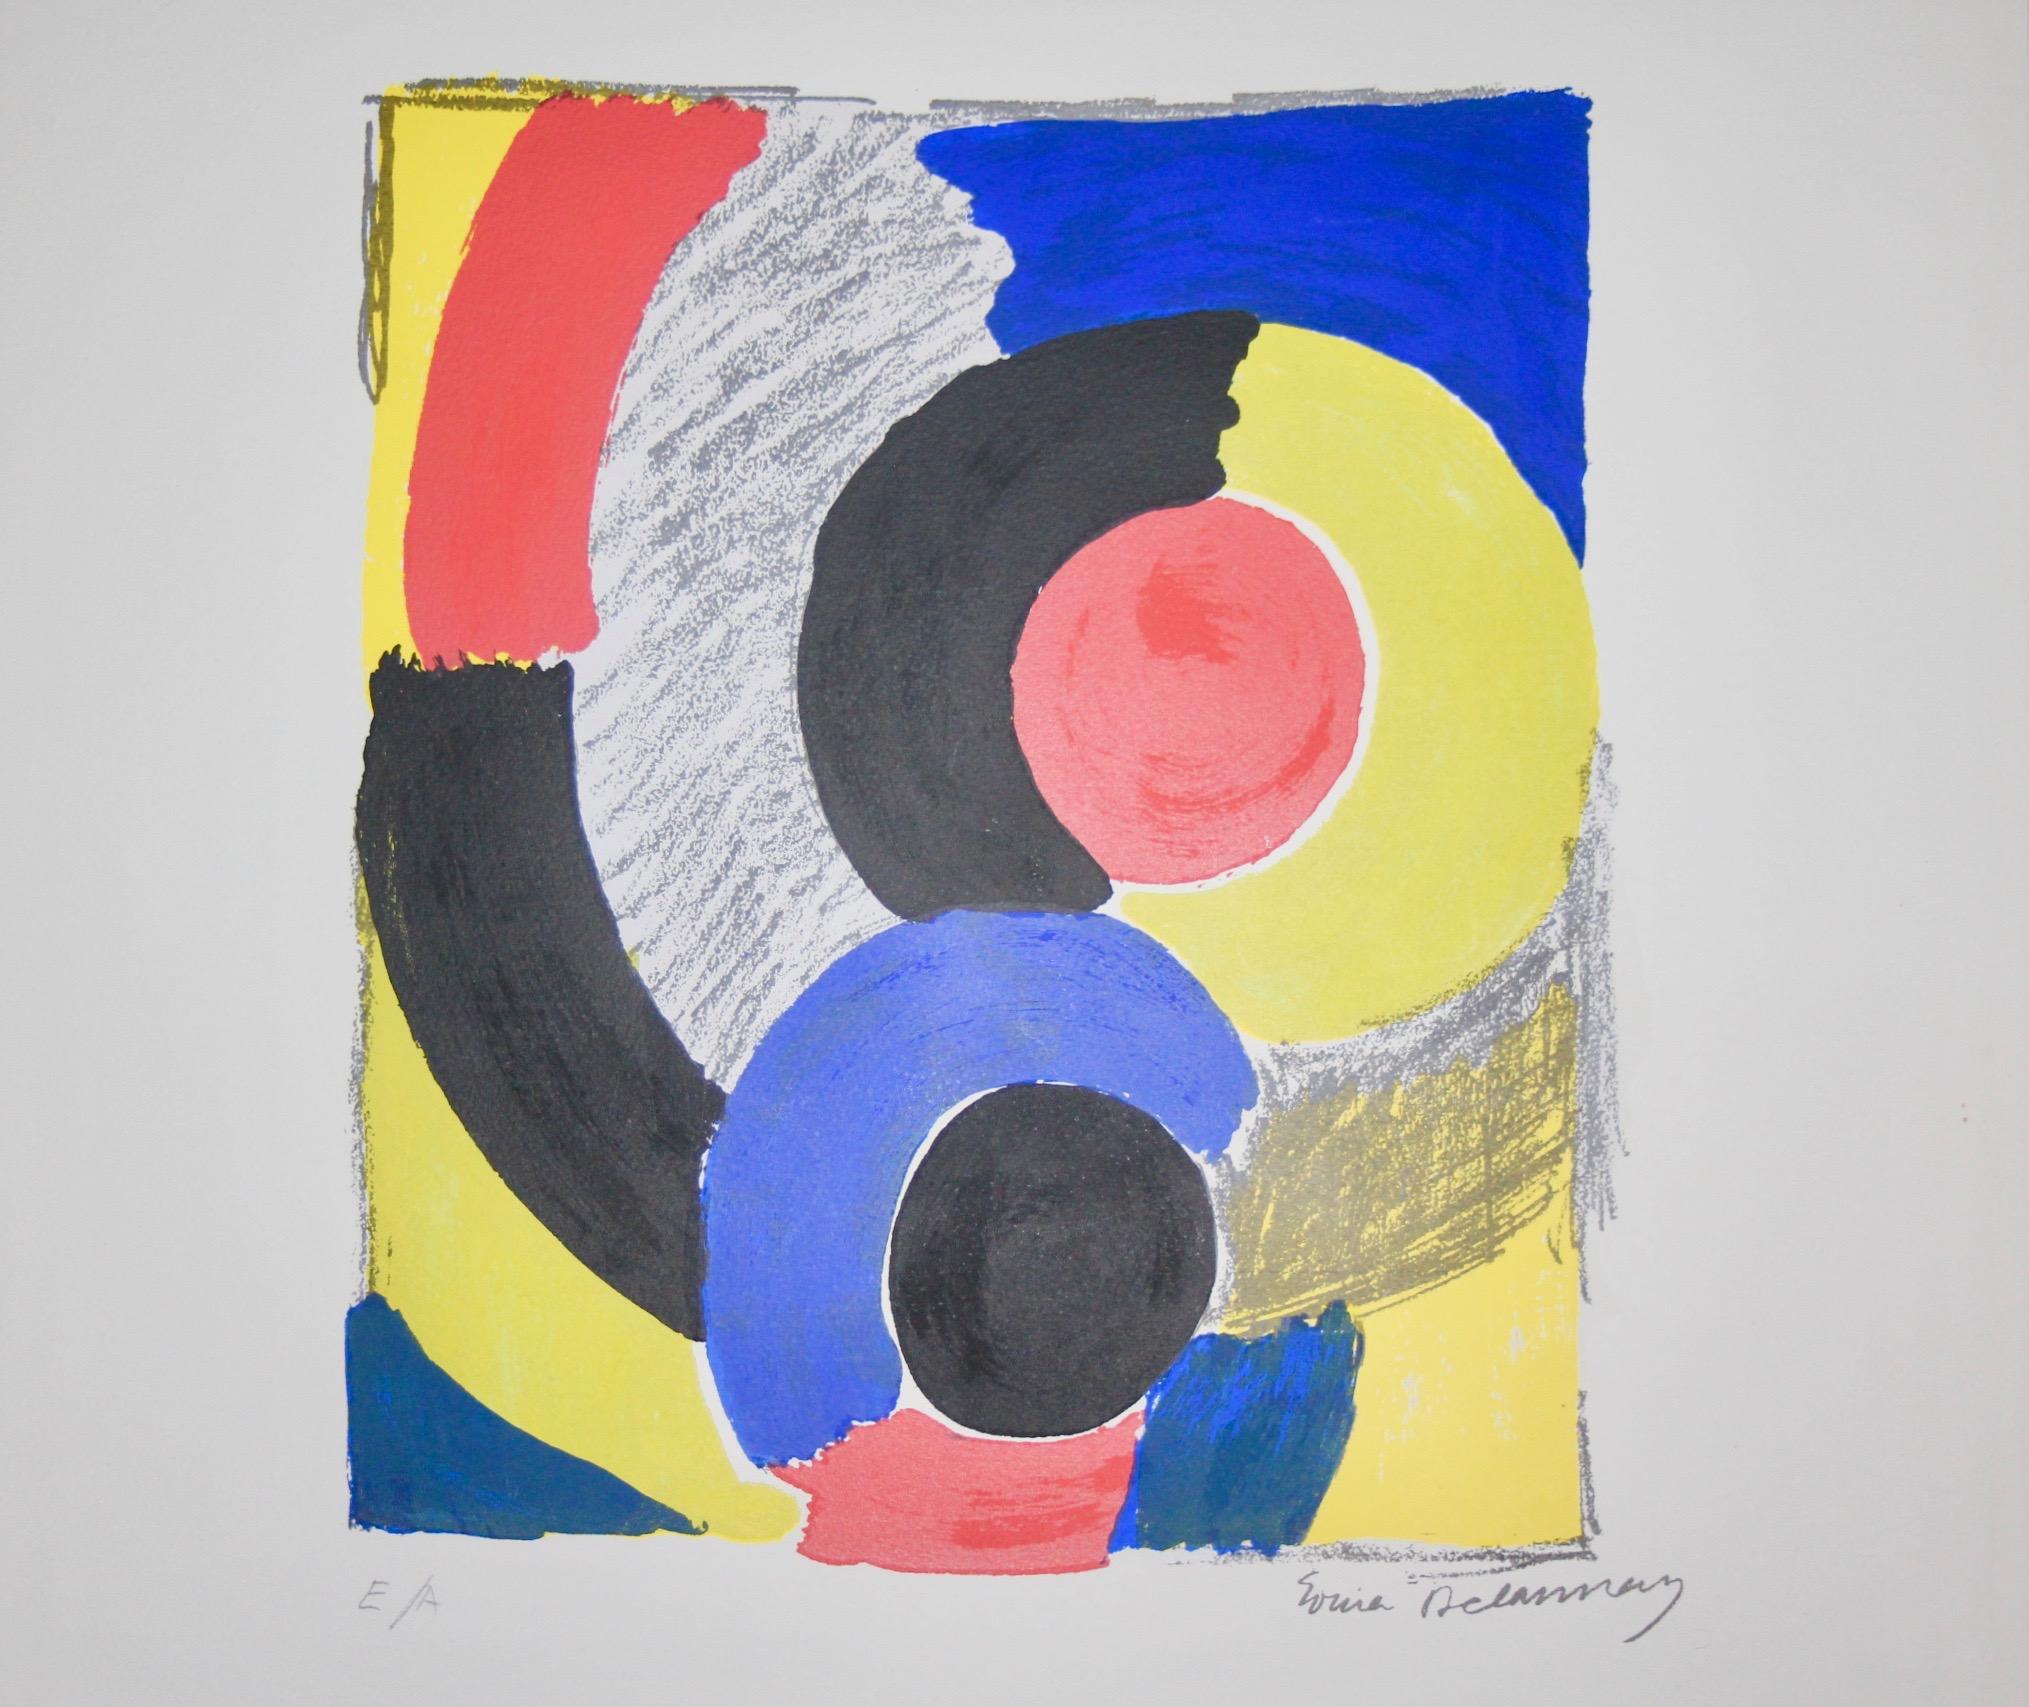 French Sonia Delaunay 'Composition' lithograph